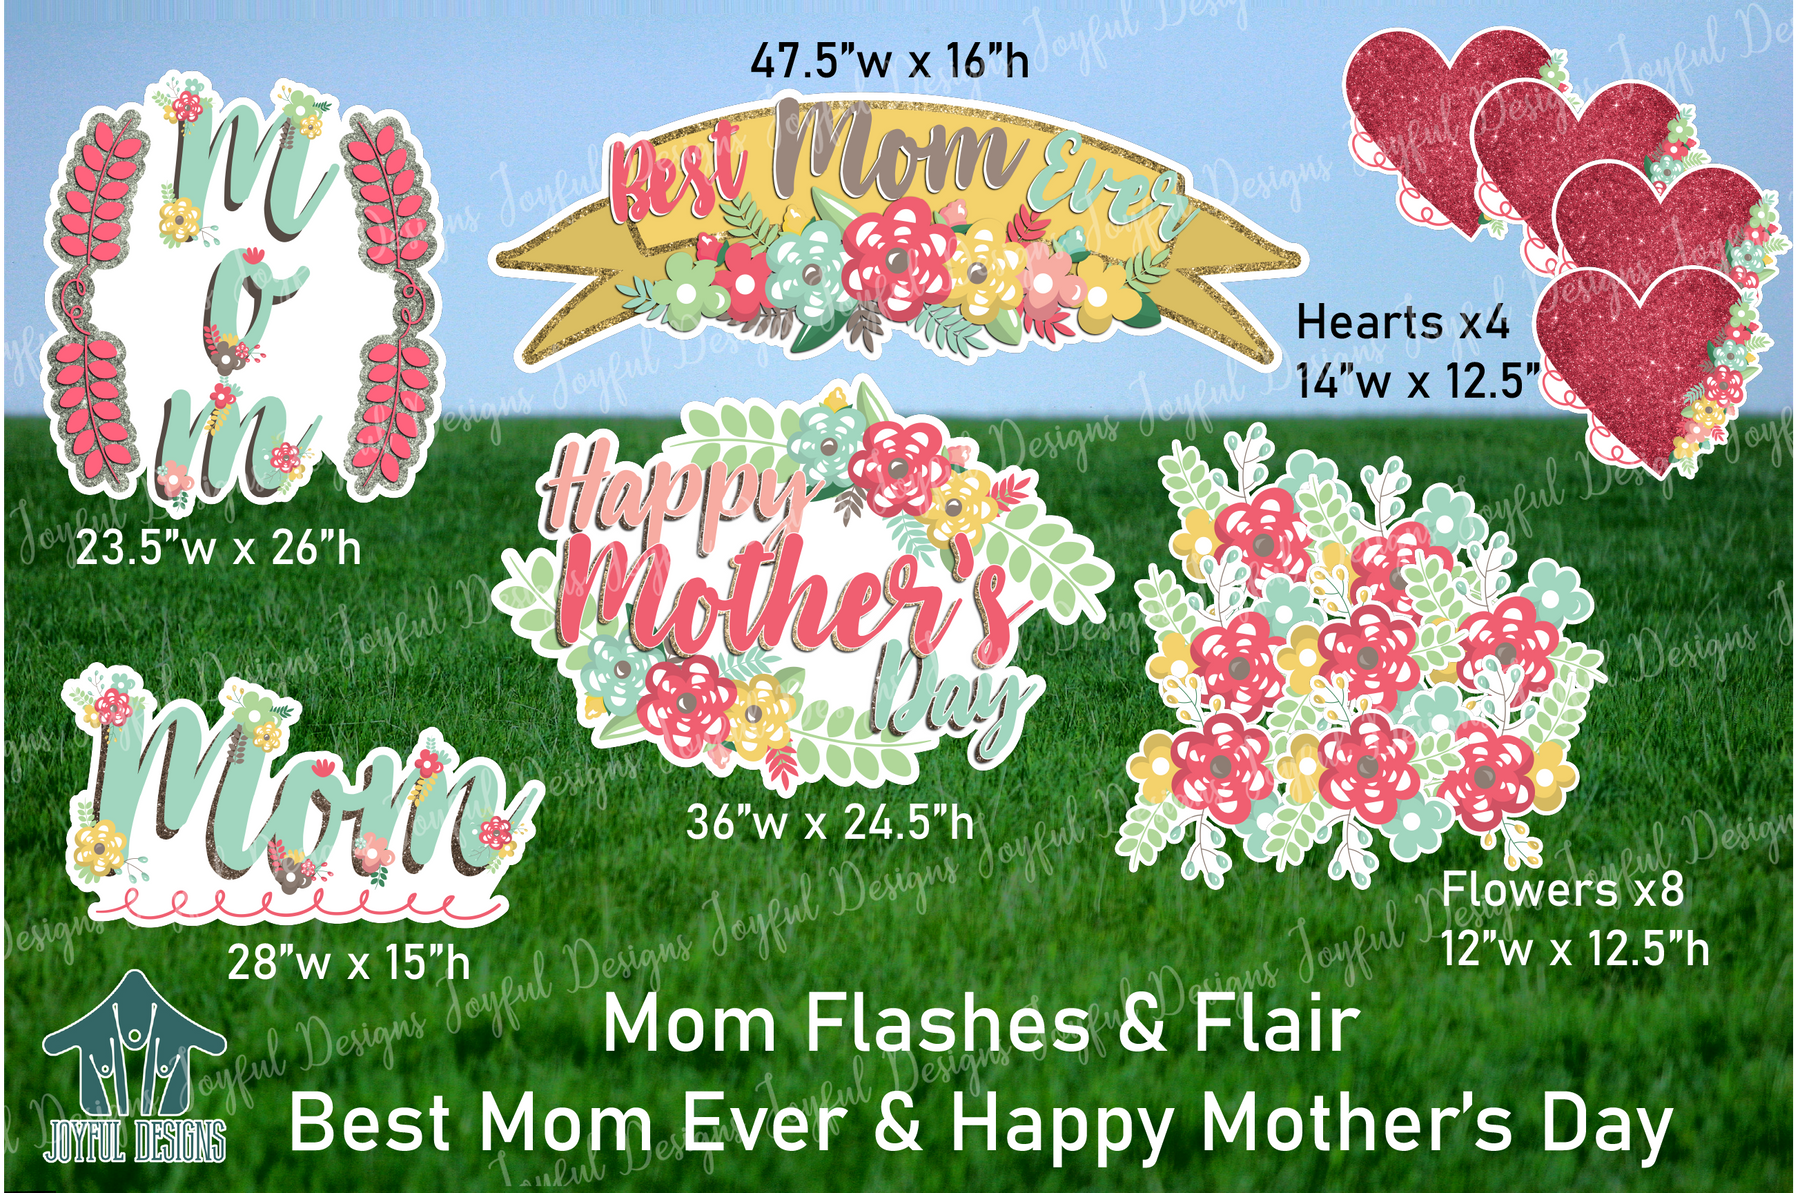 Mom Centerpieces & Flair - "Best Mom Ever" & "Happy Mother's Day"